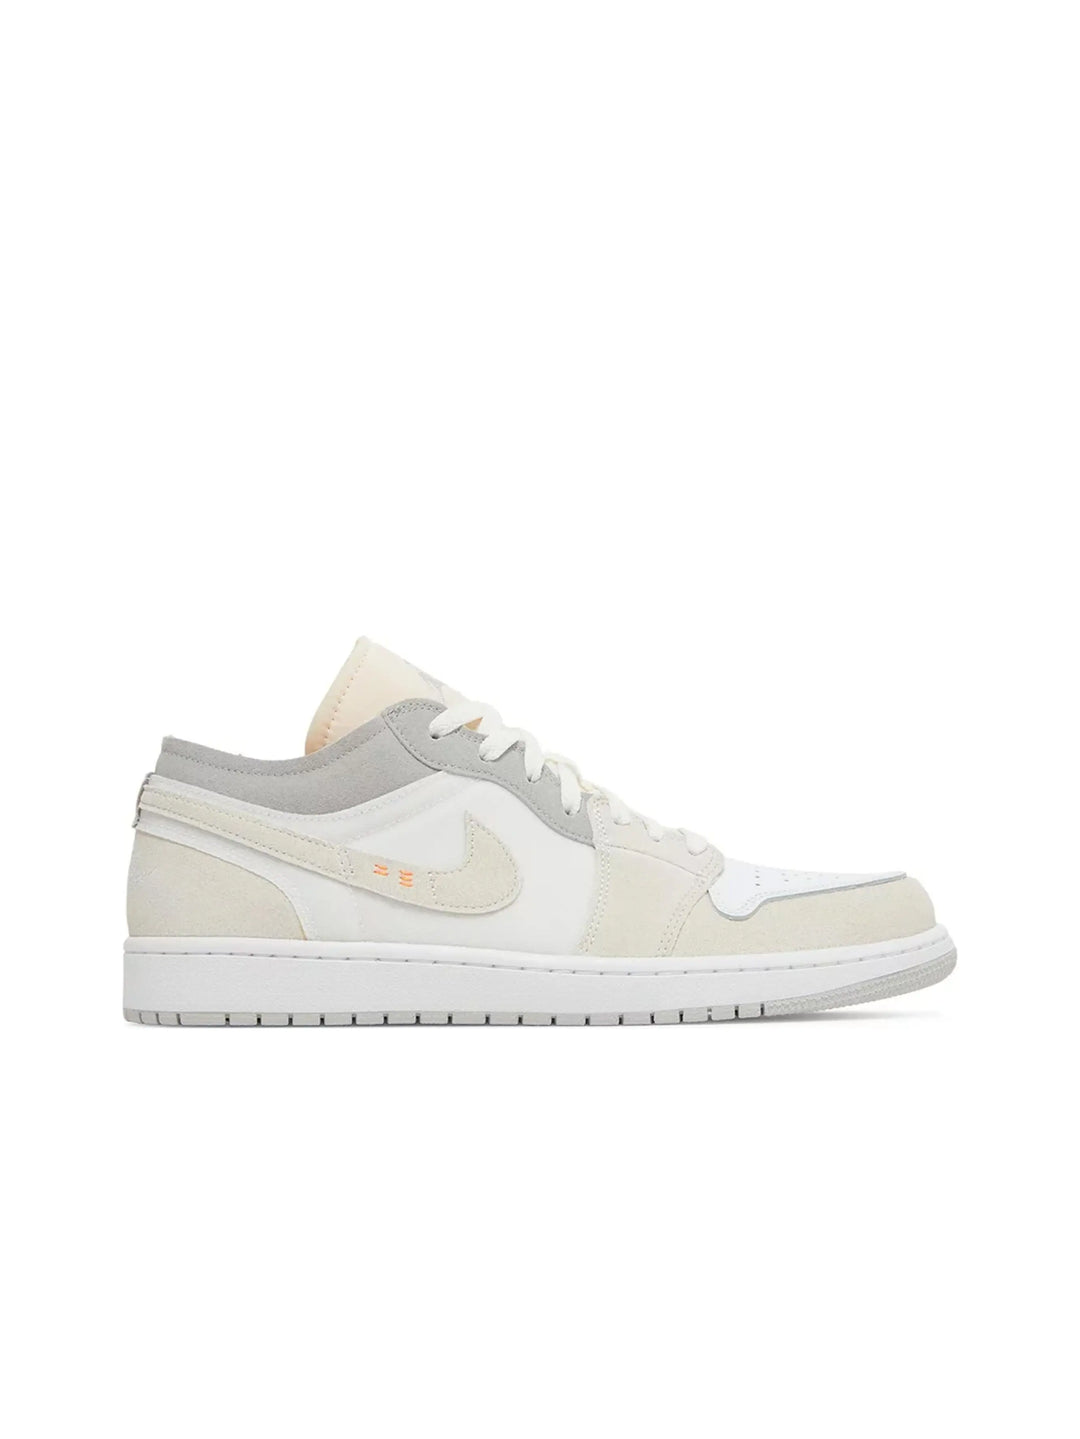 Nike Air Jordan 1 Low SE Inside Out White Phantom in Auckland, New Zealand - Shop name